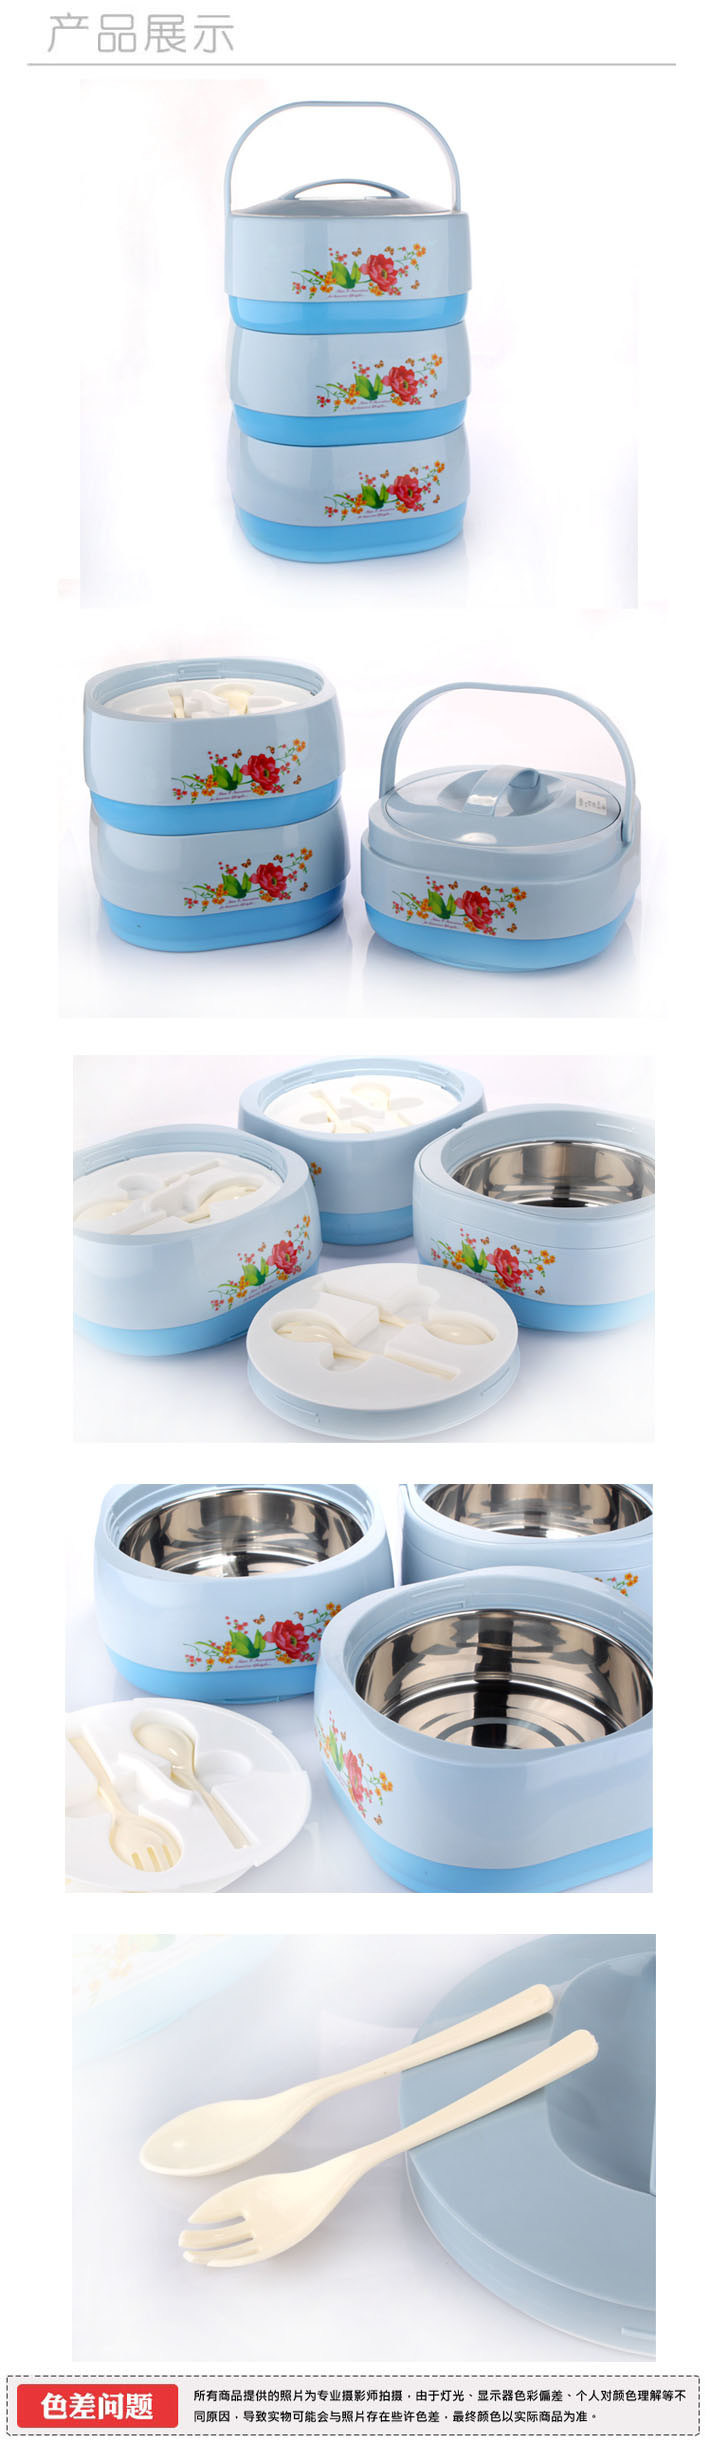 High Quality Food Container/Lunch Box 4.5 L